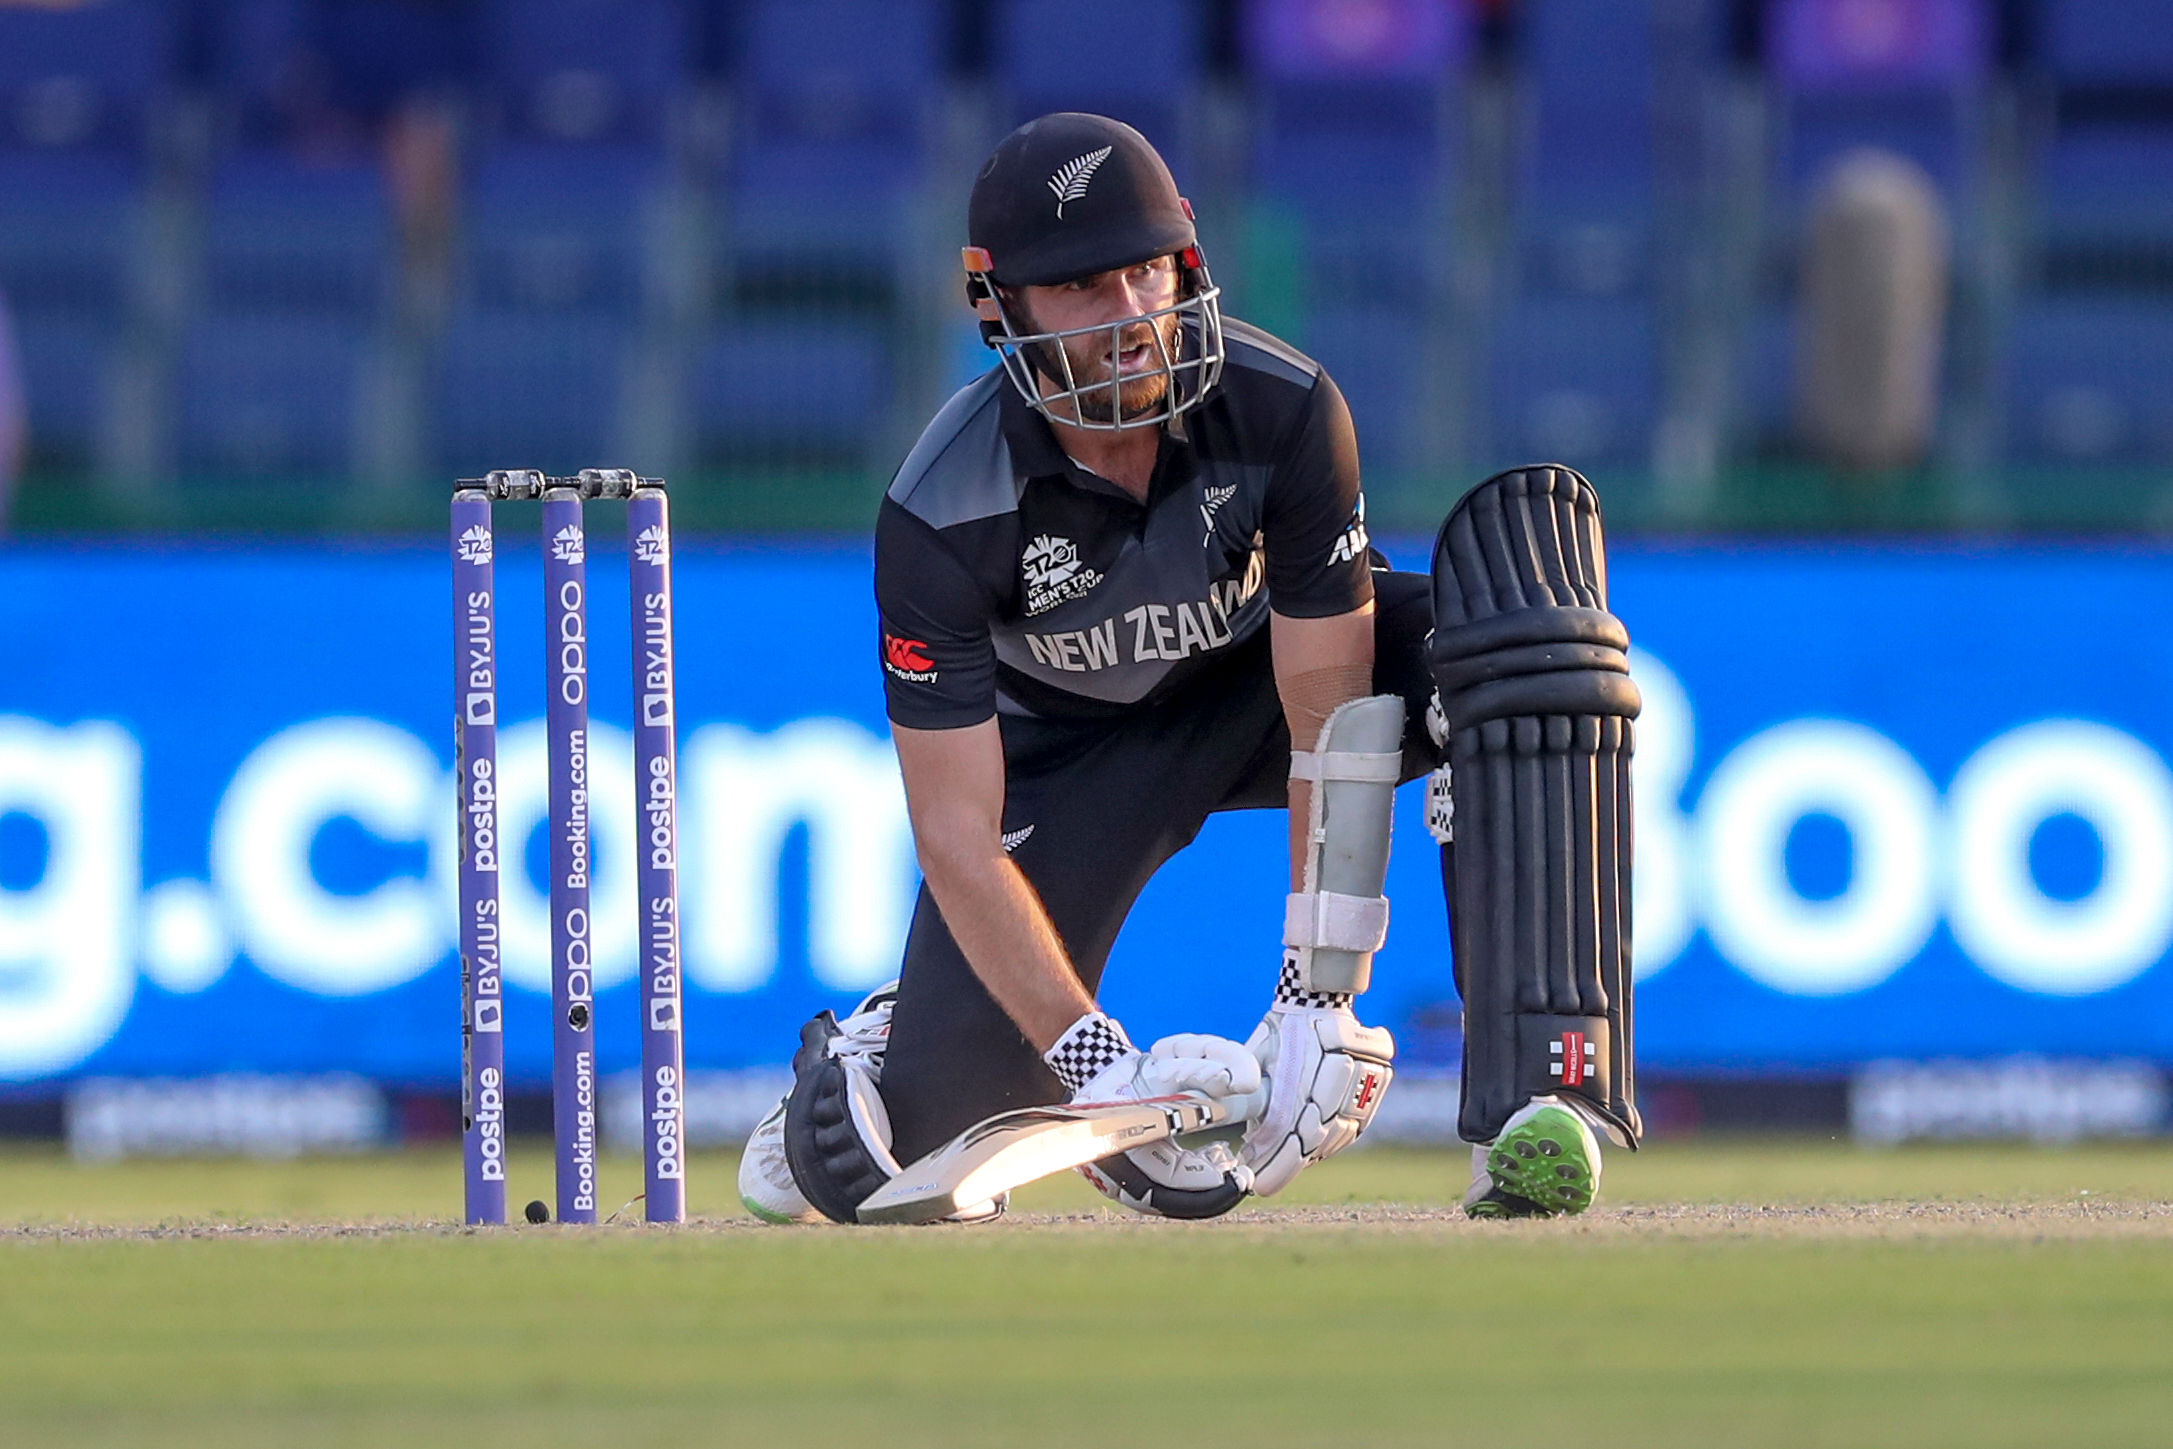 Kiwis have moved on from 2019 heartbreak vs England, says Williamson